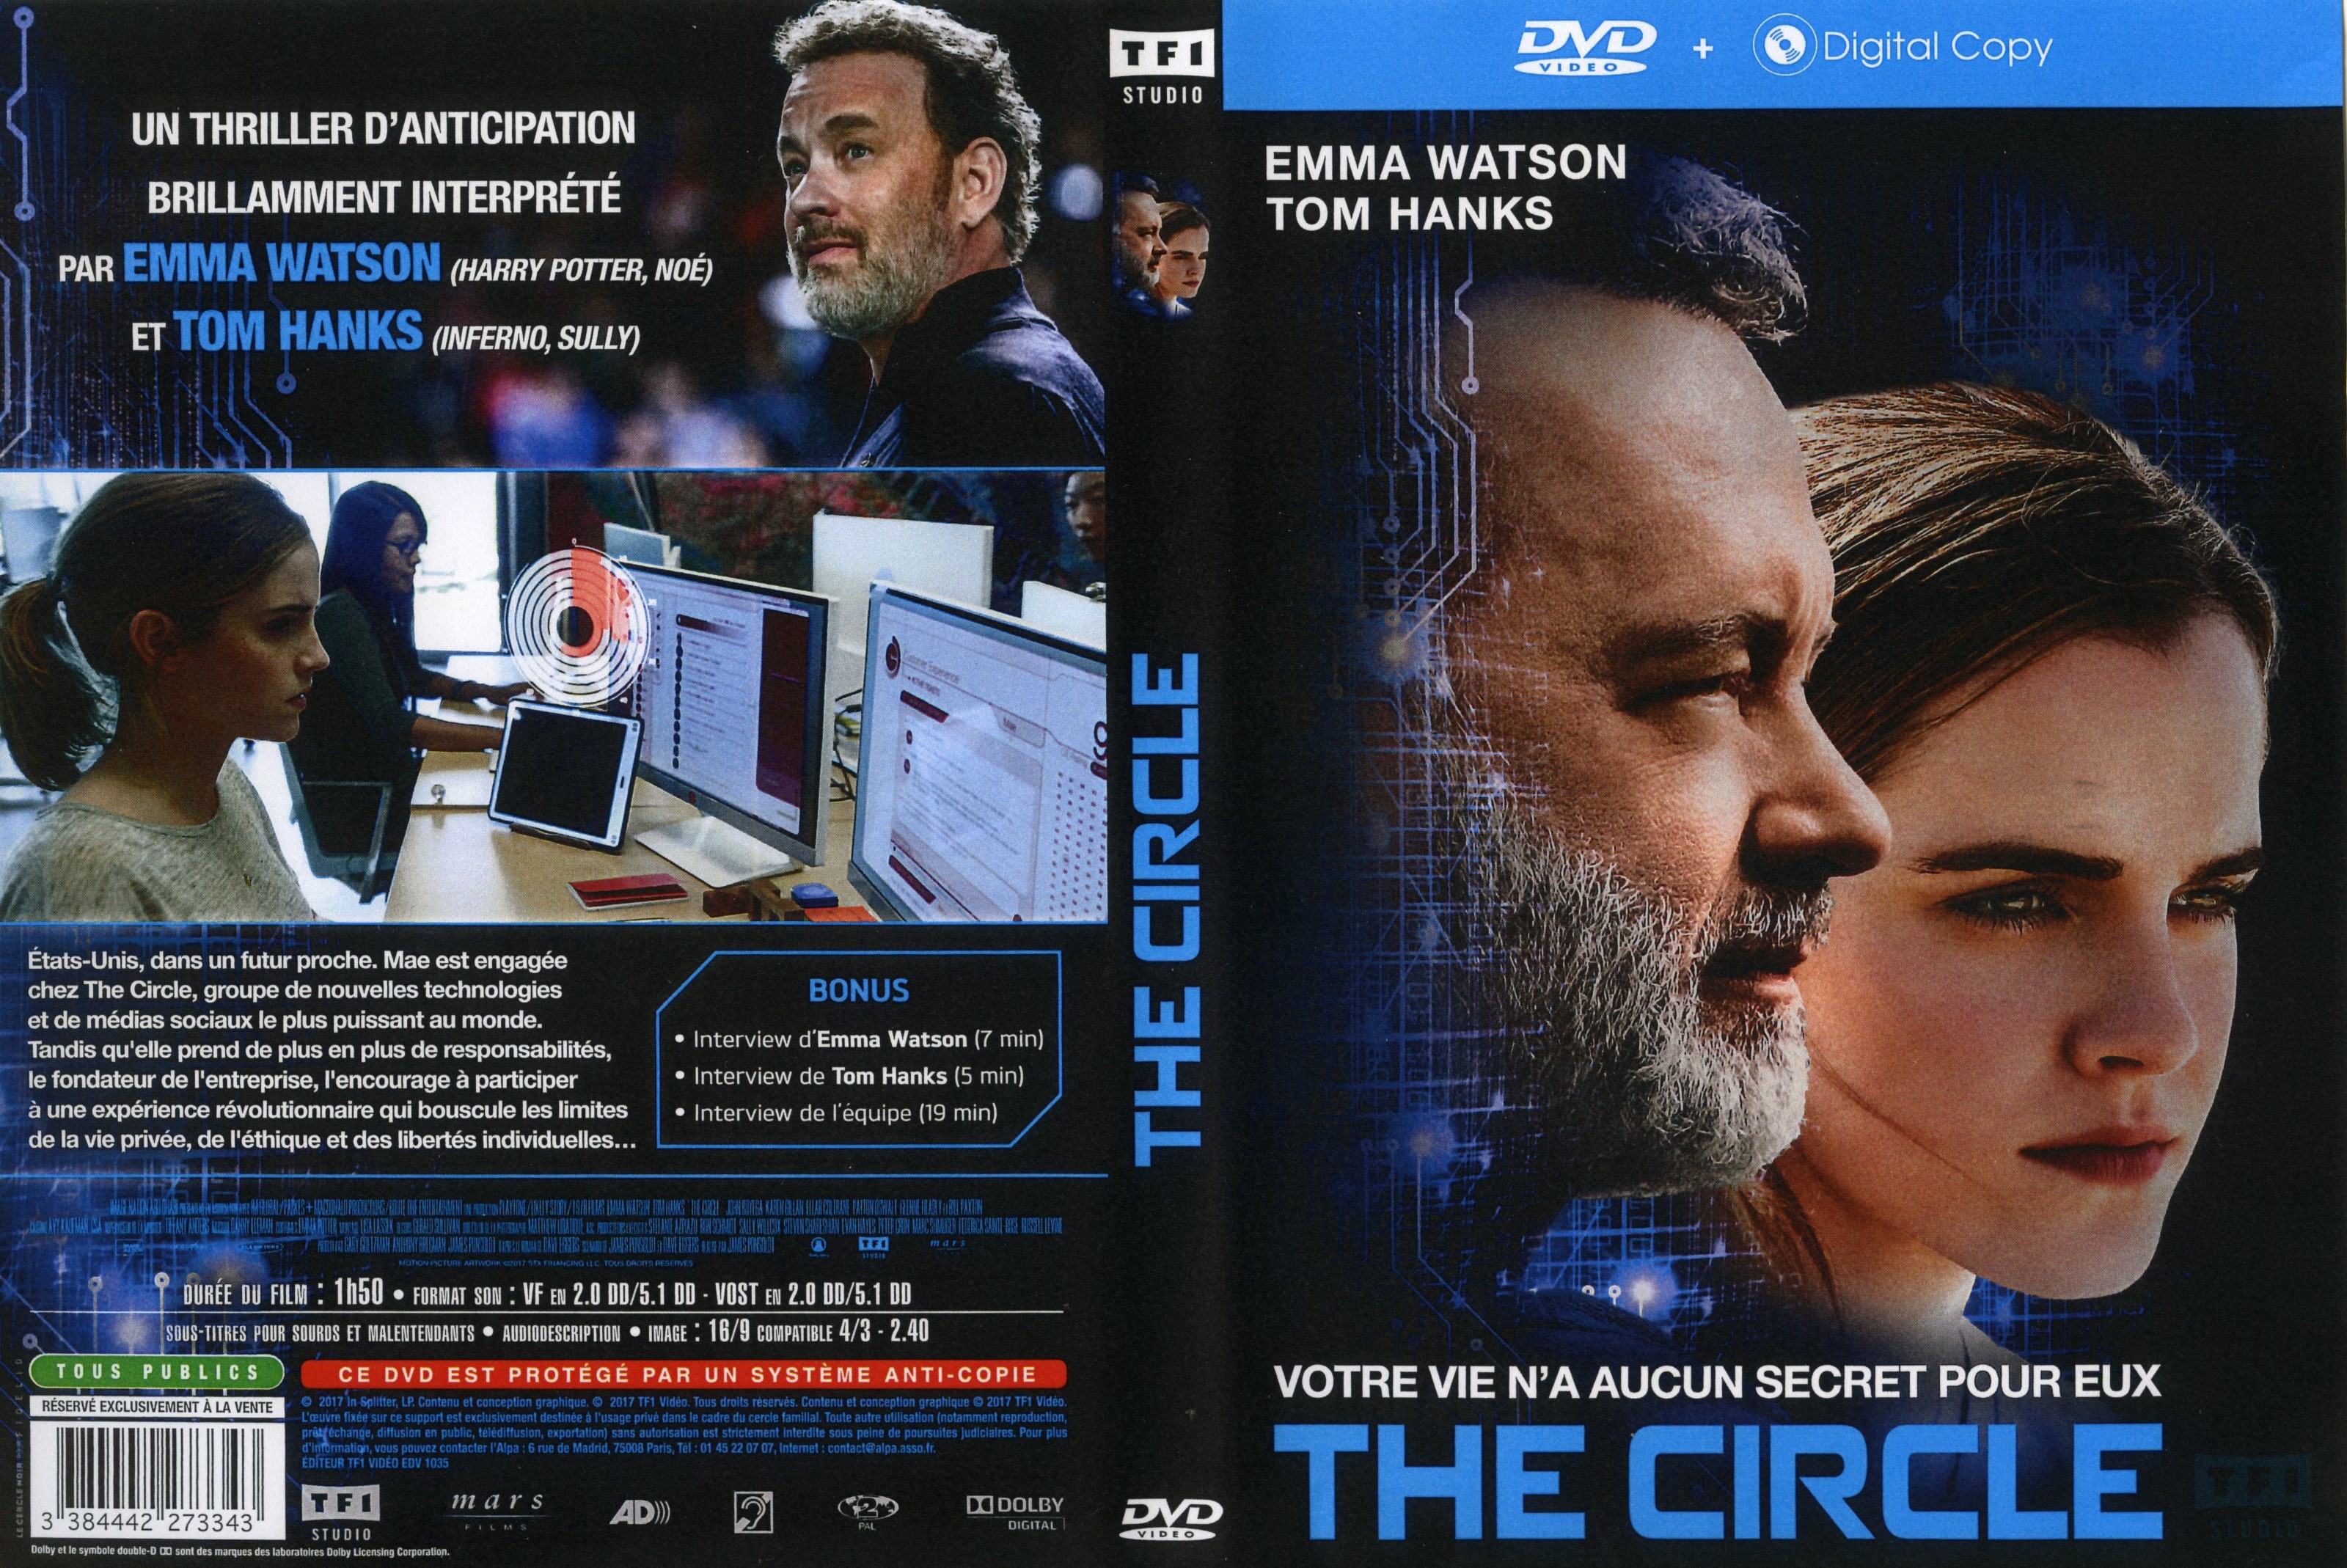 Jaquette DVD The circle (2017)